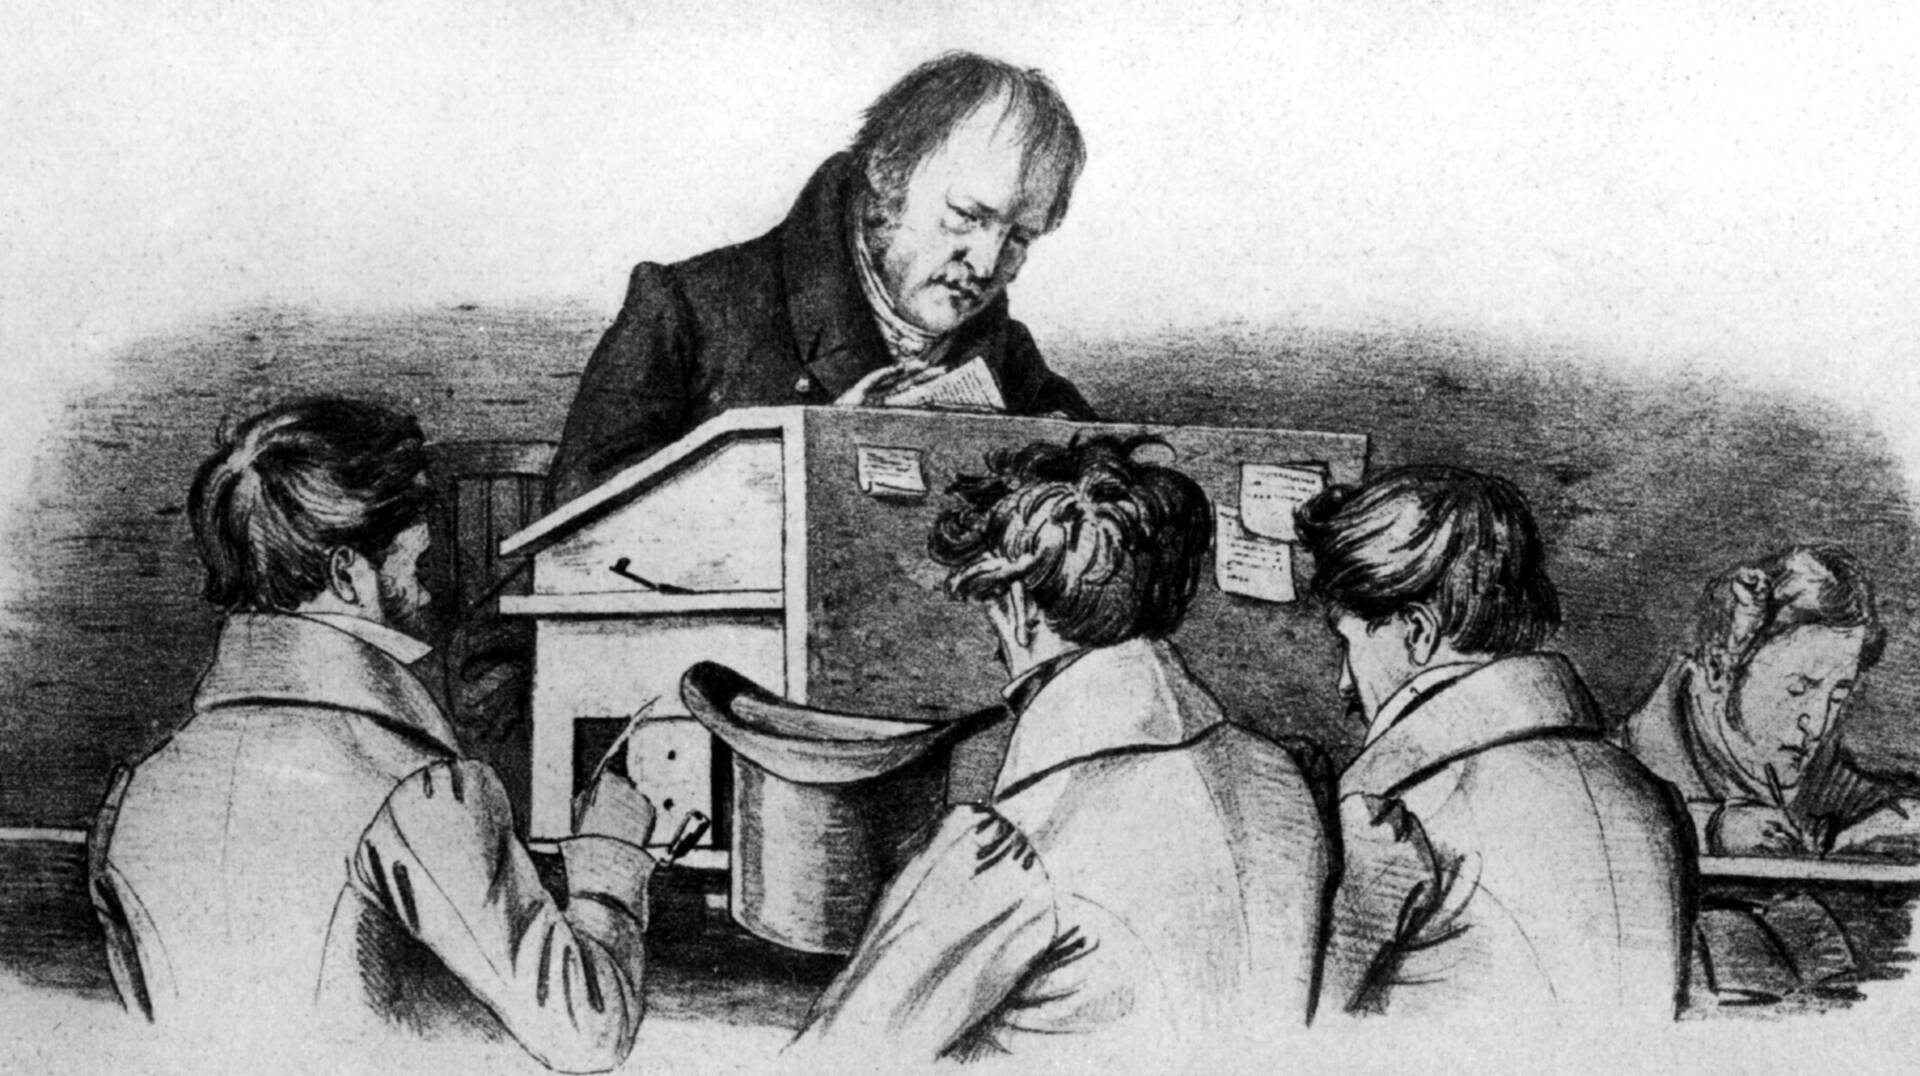 The 19th-century German philosopher G. W. F. Hegel with his students. If Hegel were alive today, his disciples would be encountering him on the monologue-friendly expanses of YouTube or Spotify.